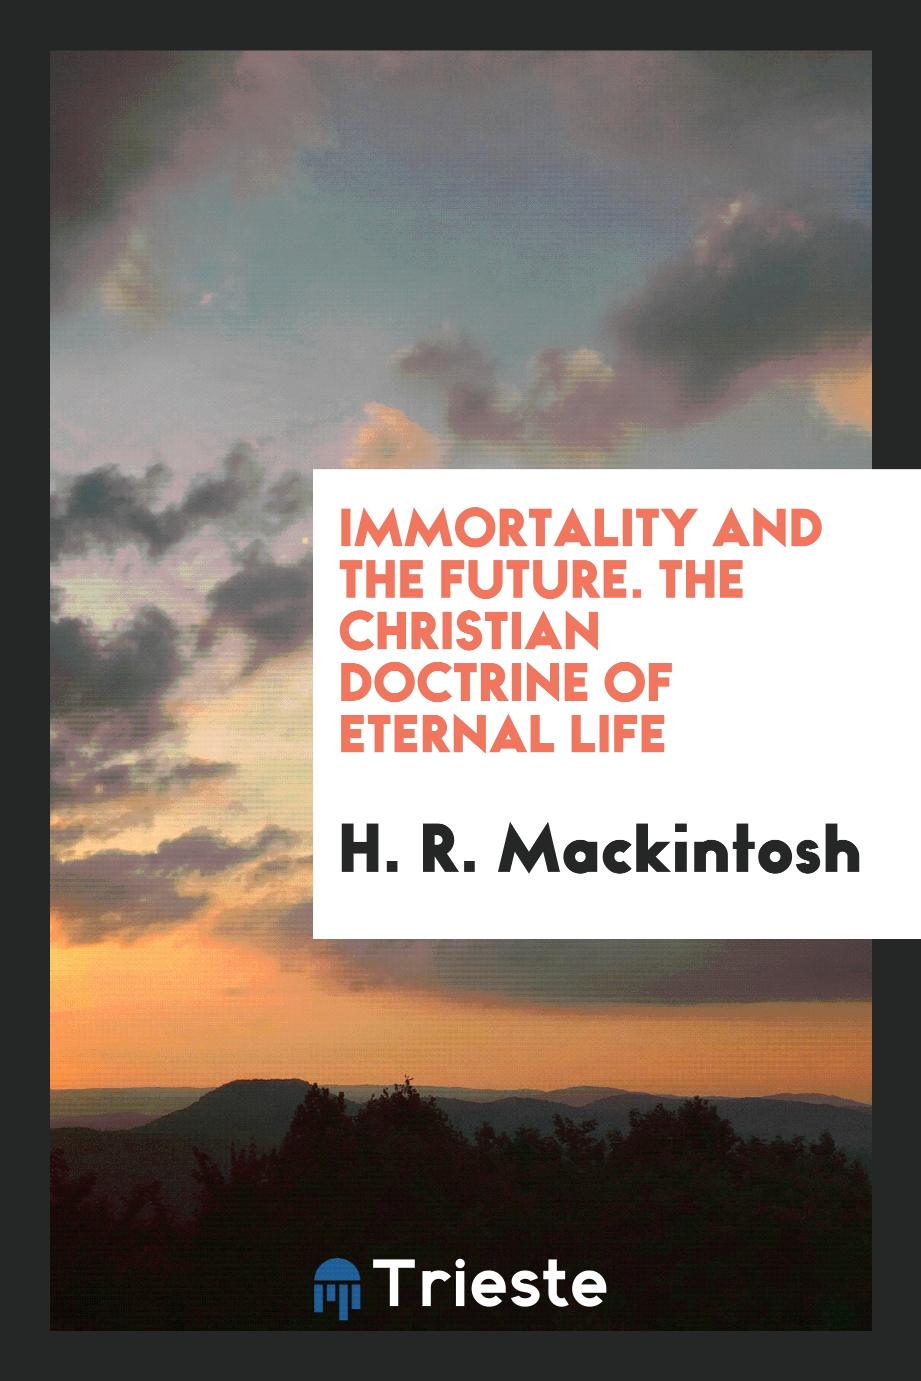 Immortality and the future. The Christian doctrine of eternal life